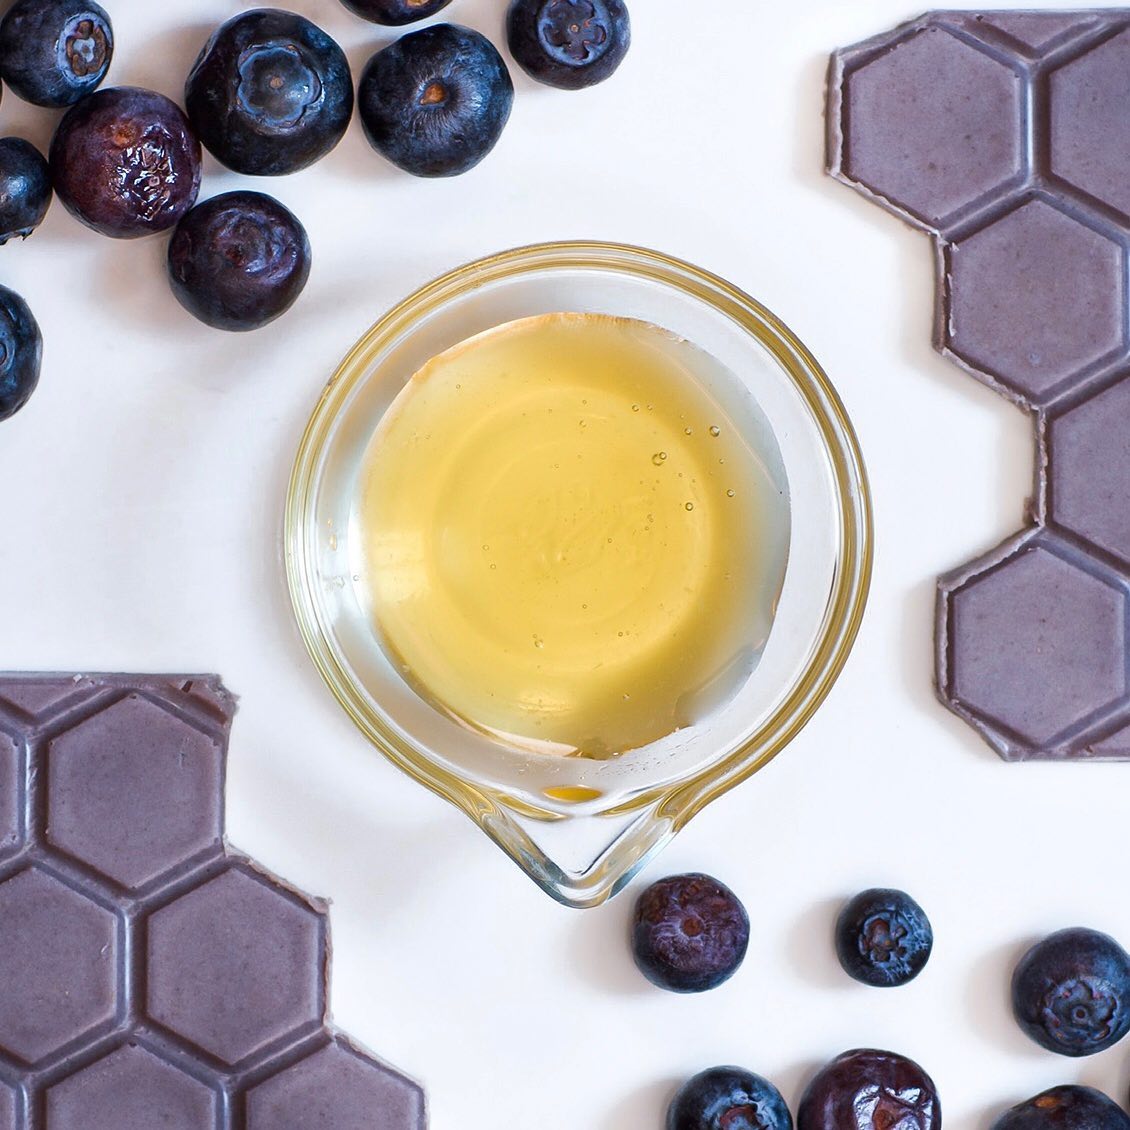 Honey, blueberries, and chocolate - instead of sugars and artificial sweeteners, Honeymoon Chocolates uses honey in their chocolate bars.